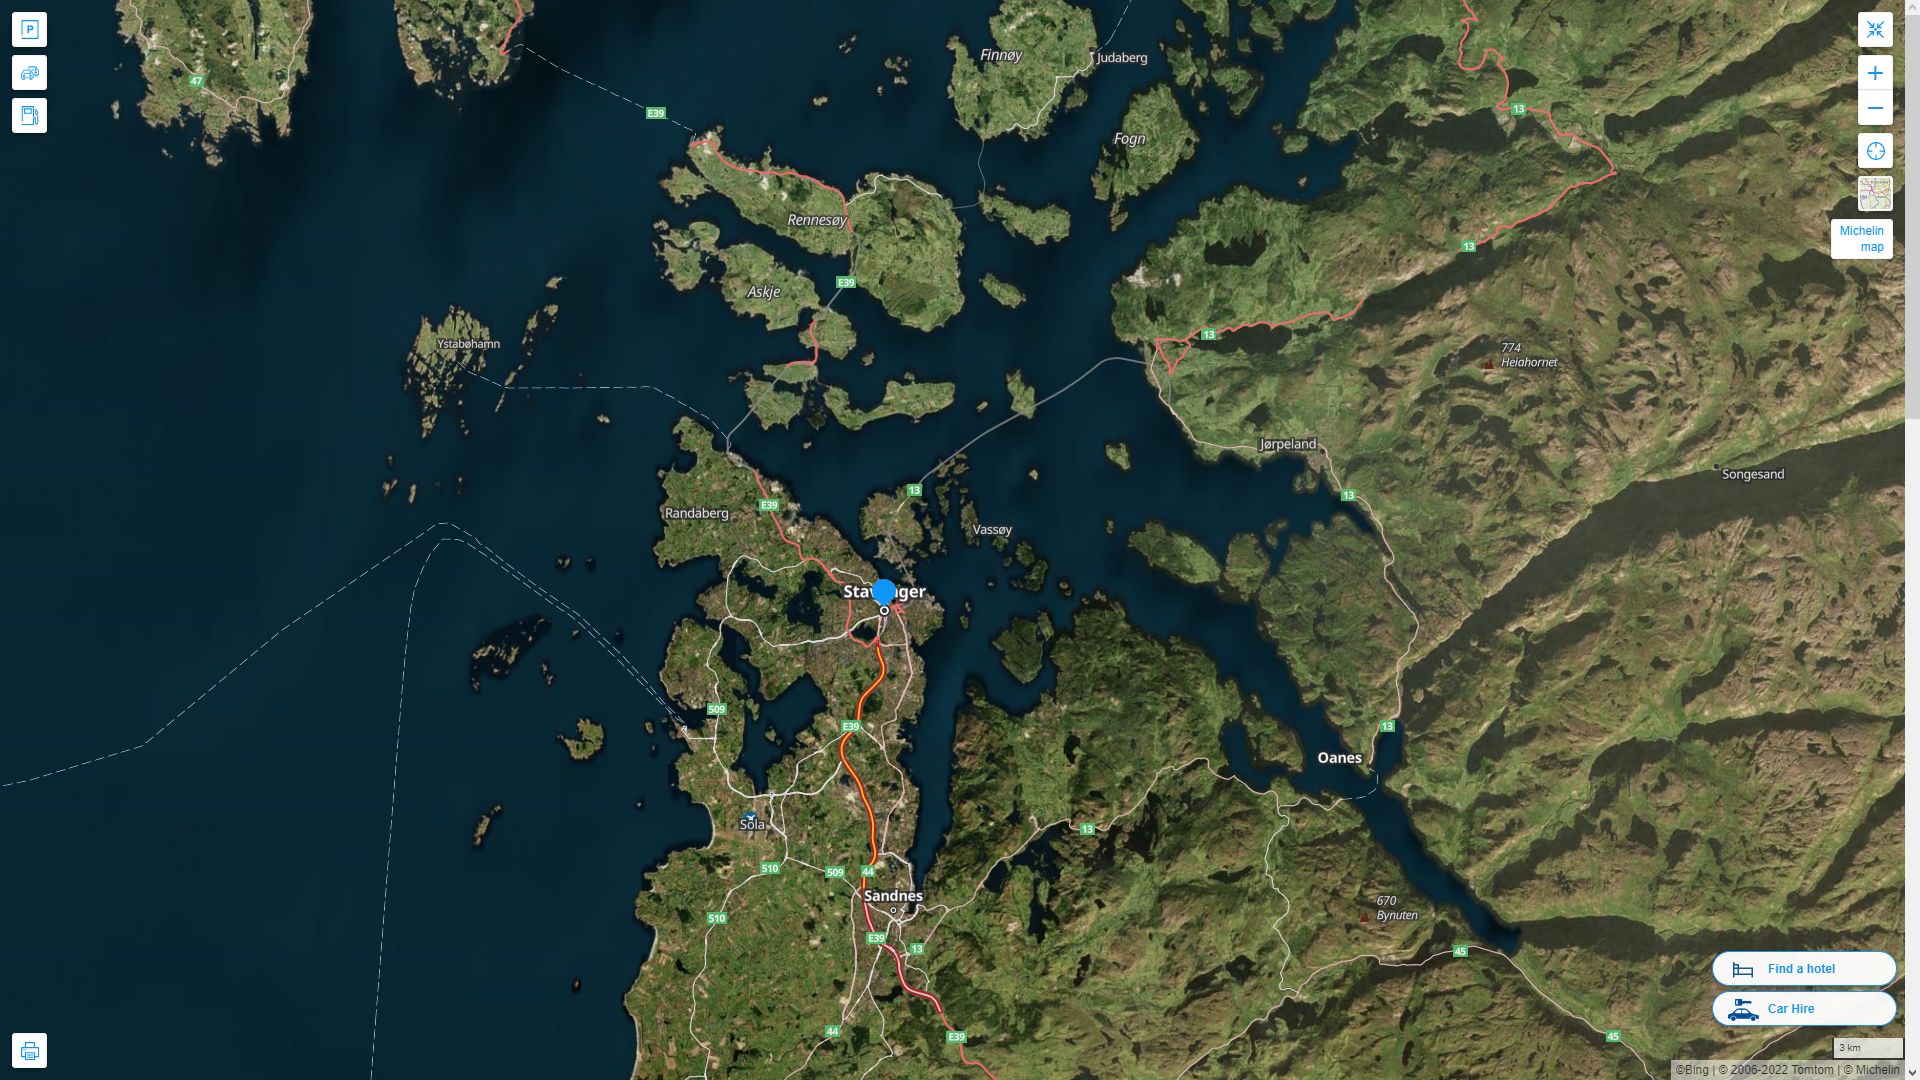 Stavanger Highway and Road Map with Satellite View